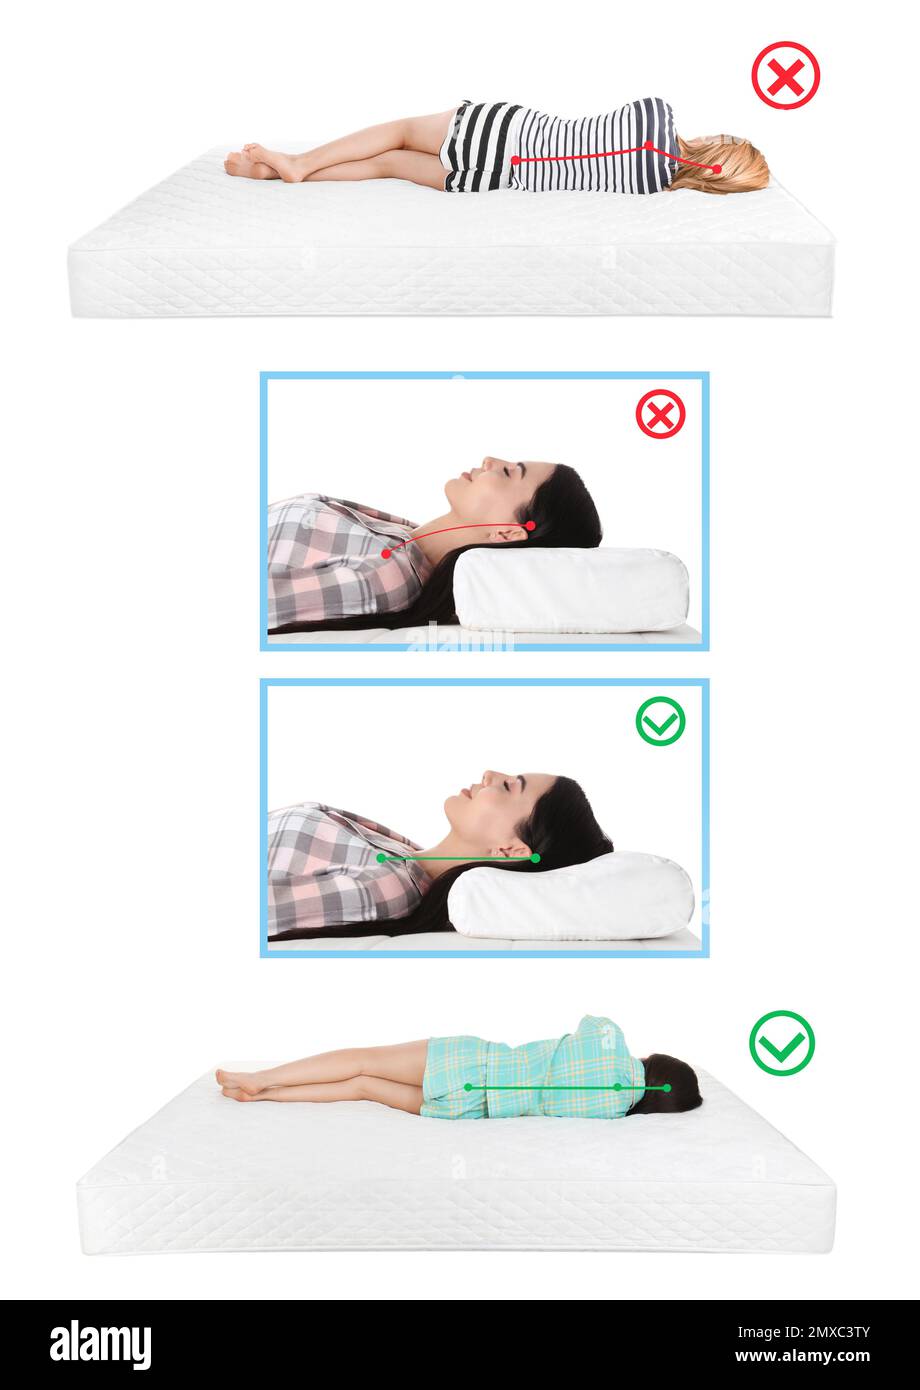 https://c8.alamy.com/comp/2MXC3TY/wrong-and-correct-sleeping-posture-choose-right-pillow-and-mattress-2MXC3TY.jpg